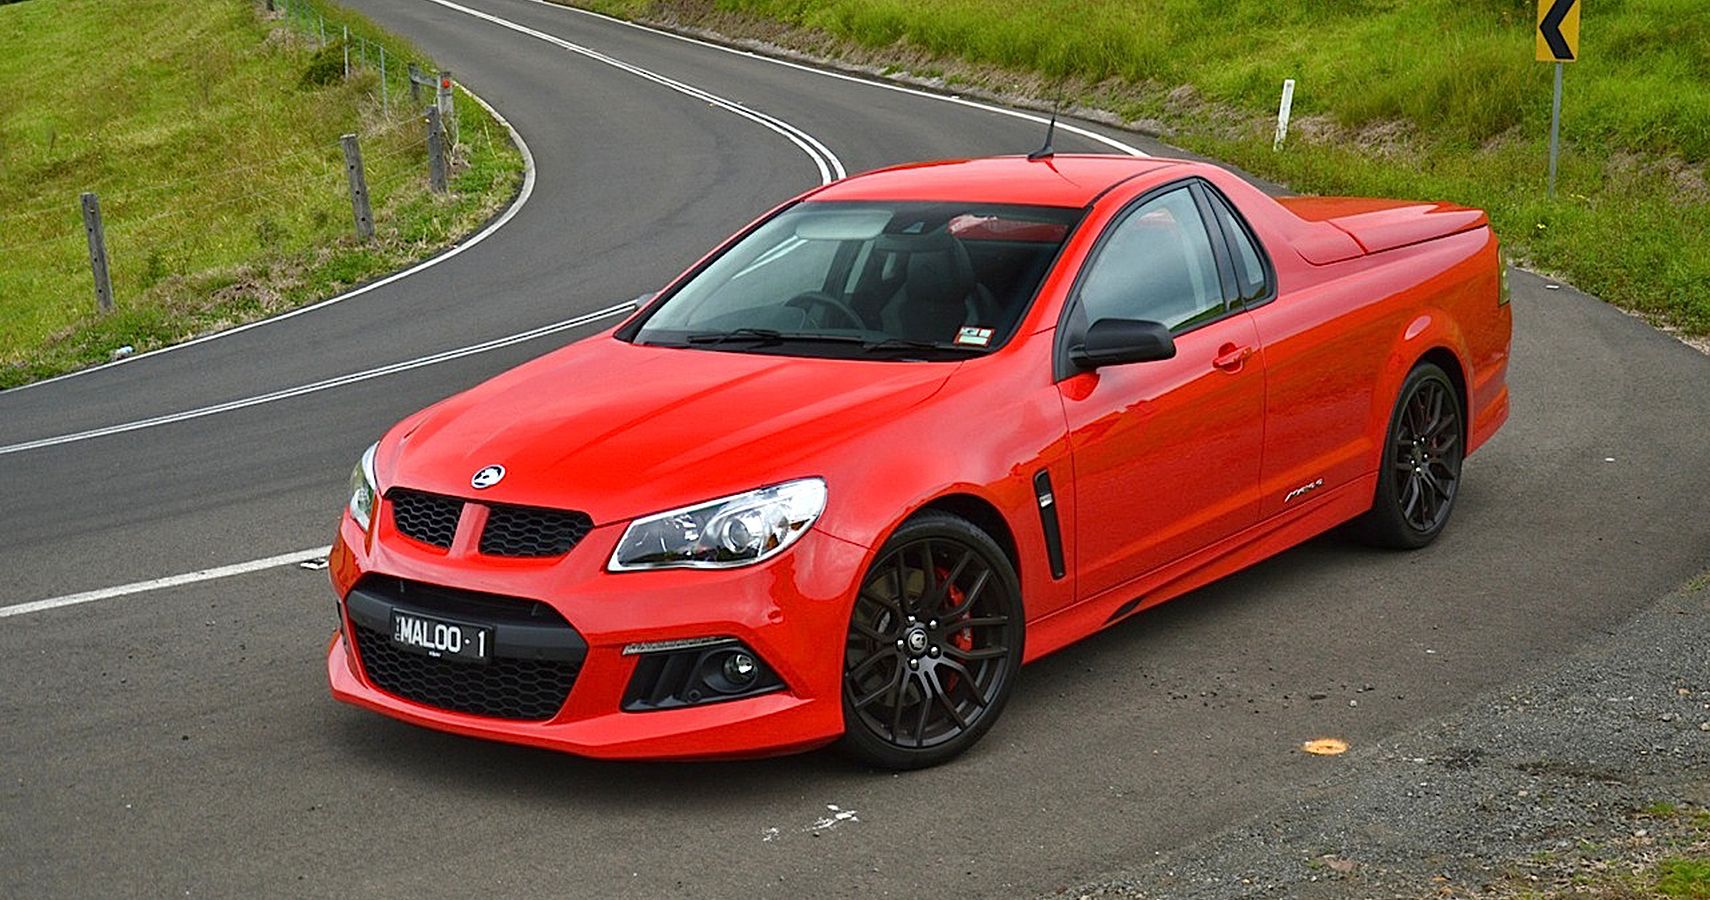 10 Awesome Utes And Trucks We'D Pick Over A Muscle Car Any Day Of The Week